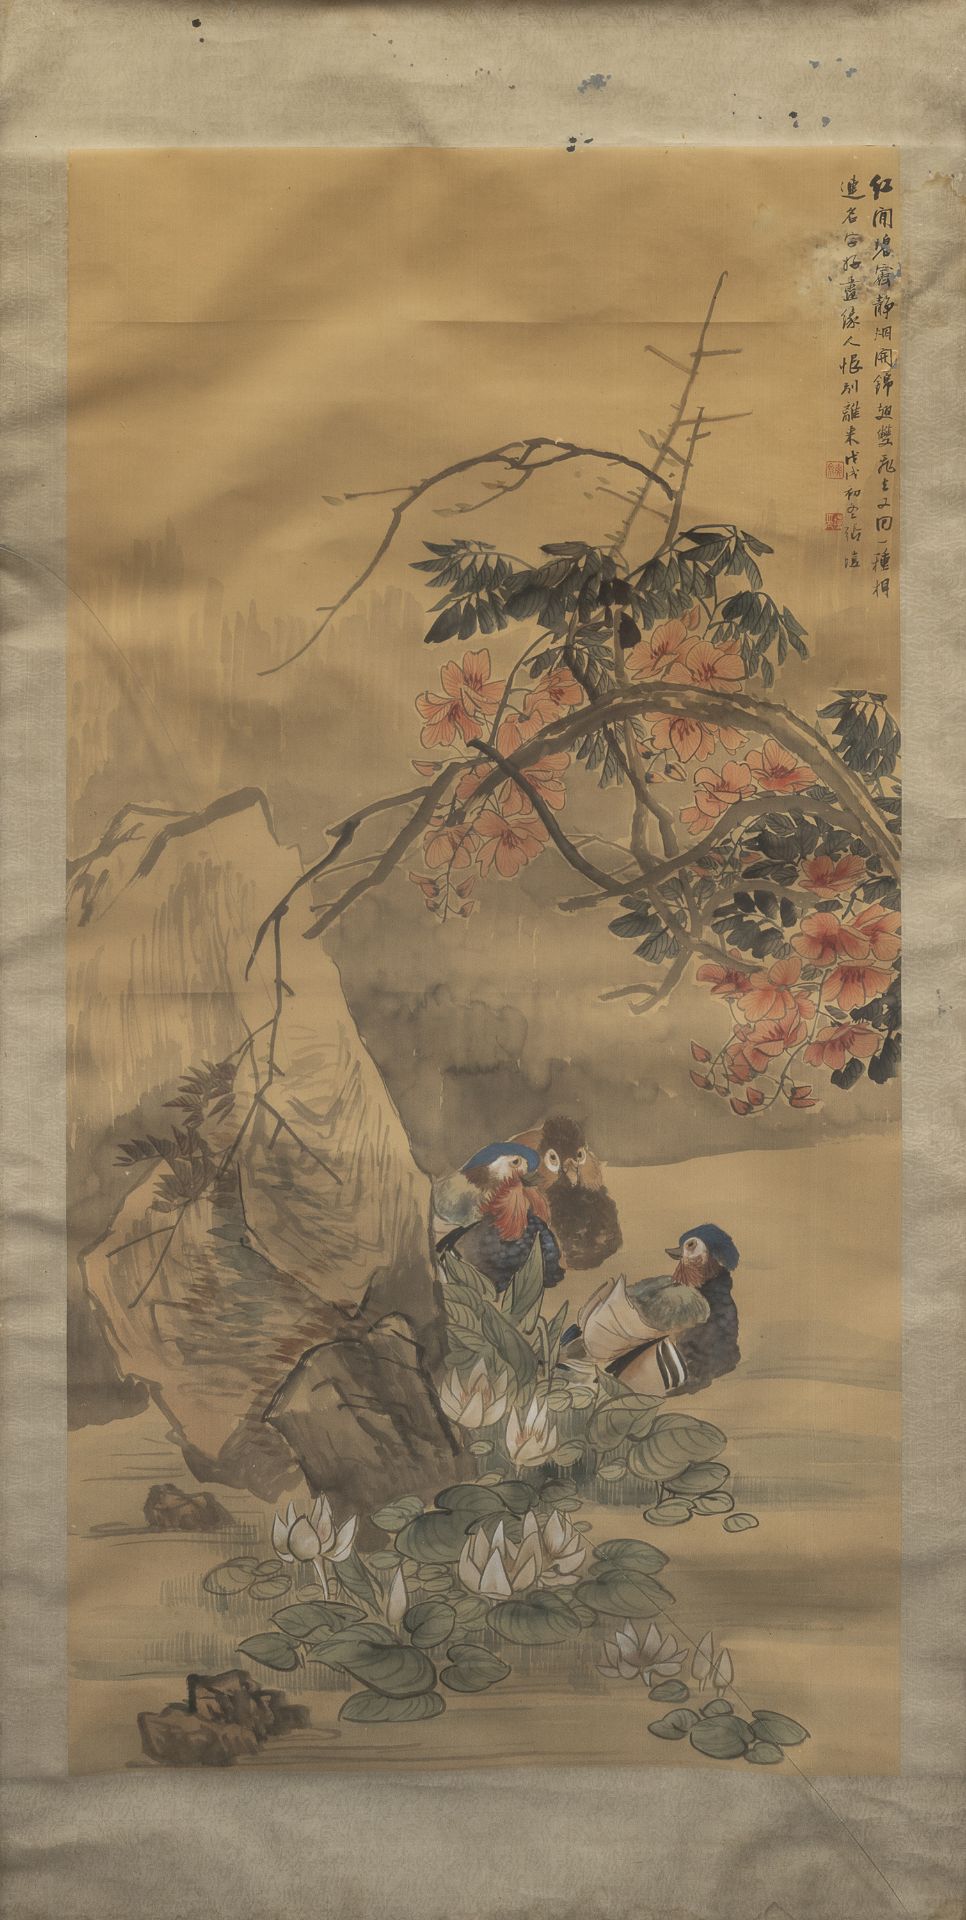 A PAIR OF CHINESE WOODCUT PRINTS EARLY 20TH CENTURY. LANDSCAPE WITH TREE LANDSCAPE WITH ROASTER.